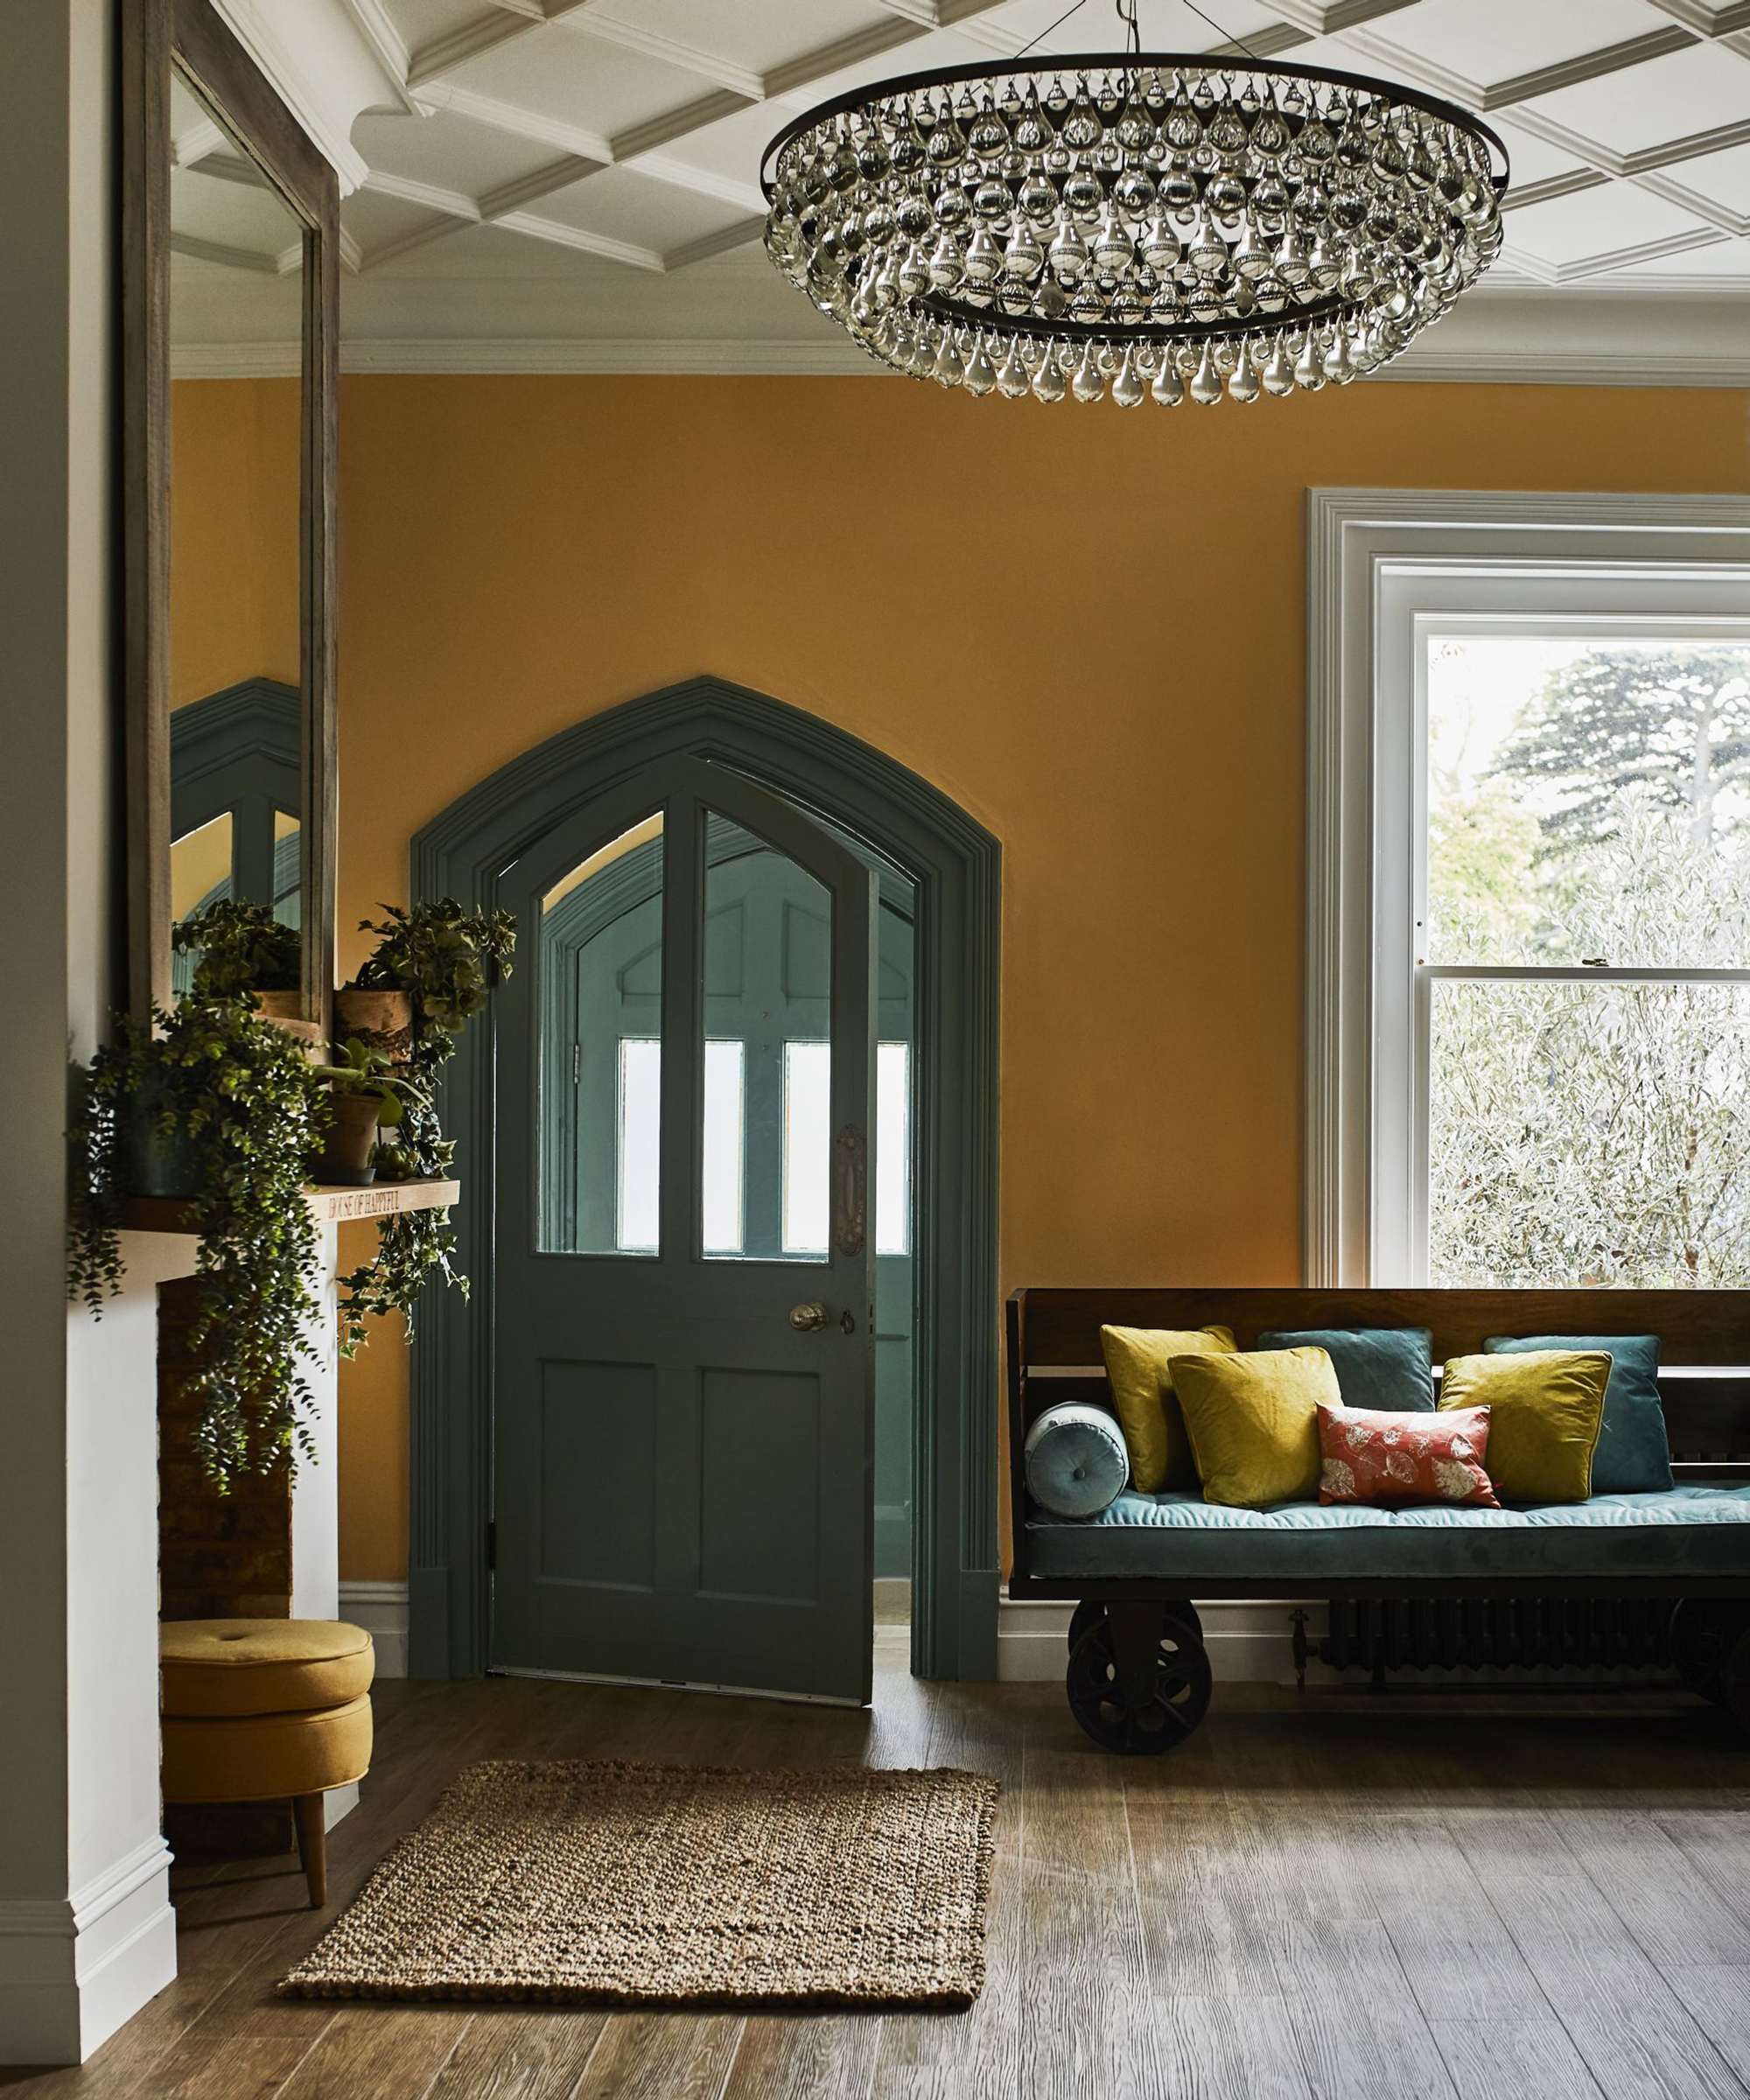 Hallway ideas by Carpetright with seating area and statement chandelier